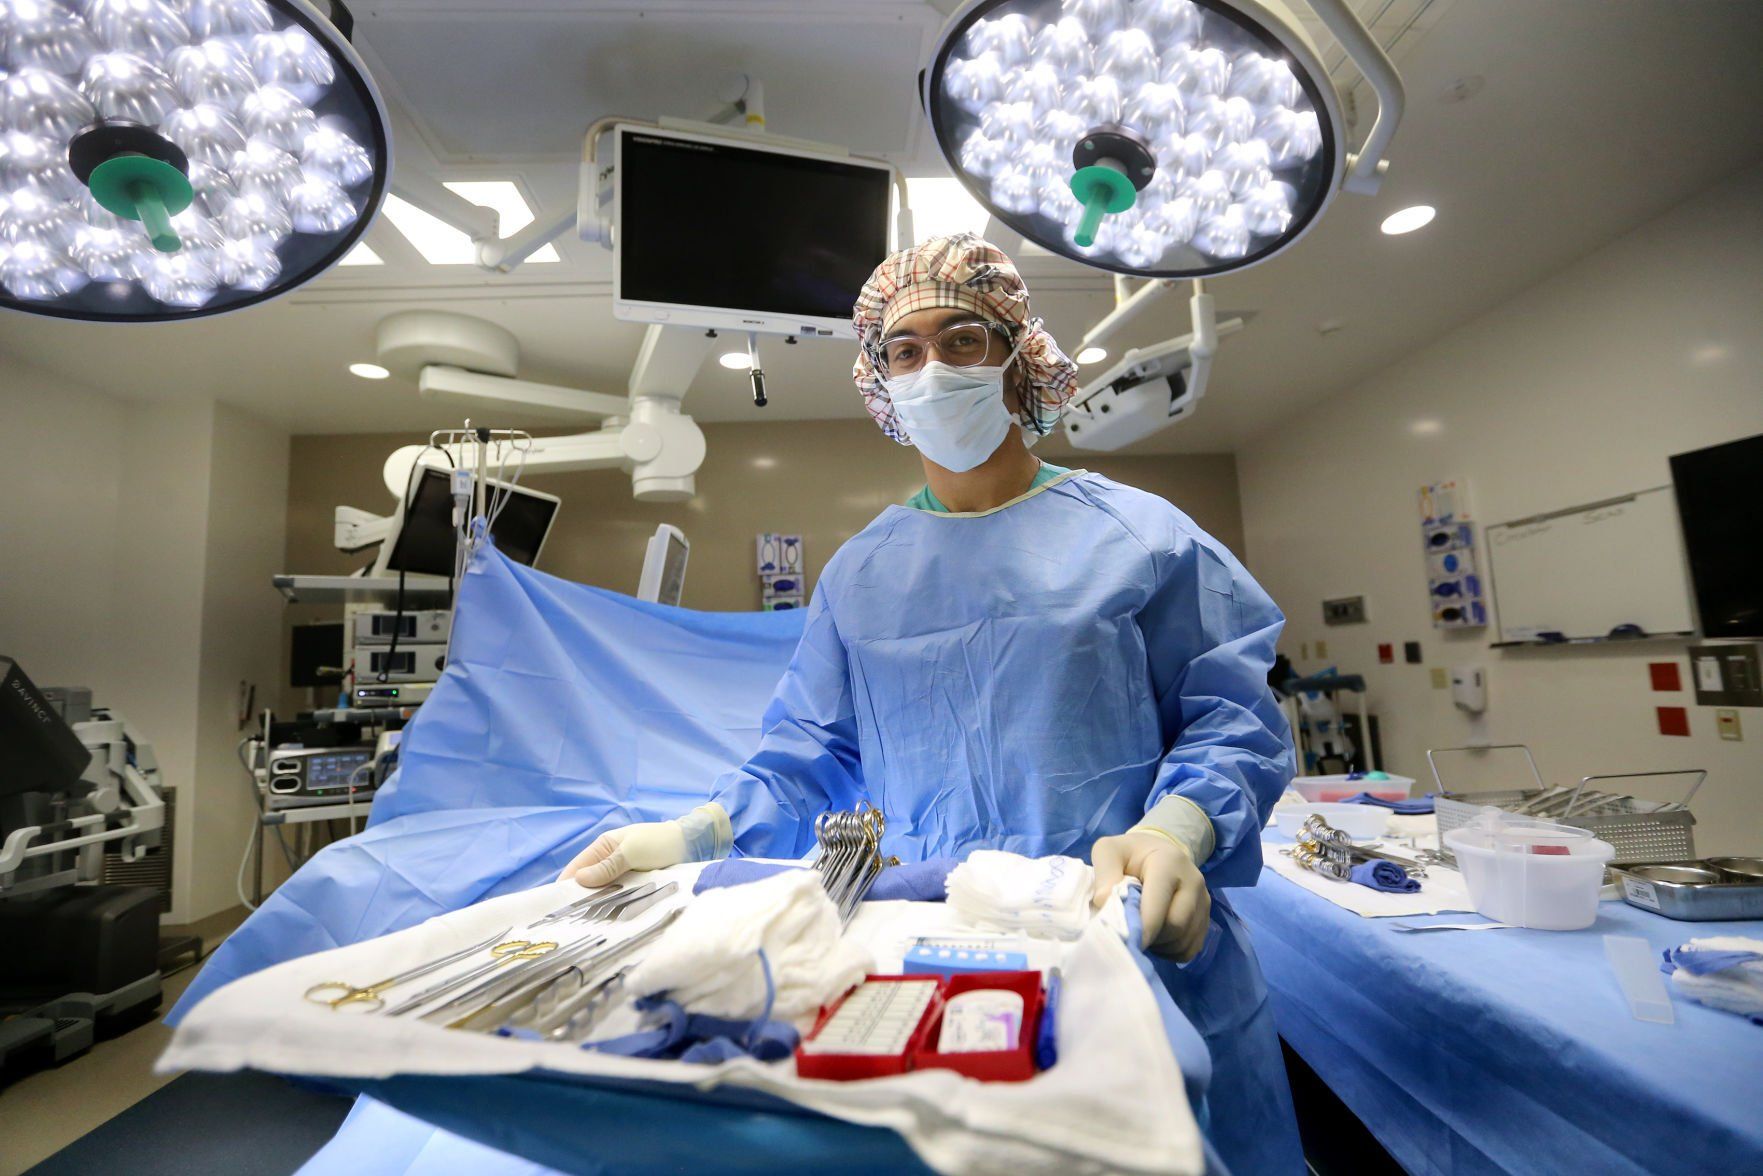 Jerry-Jordan Kane, a surgical technician at MercyOne Dubuque Medical Center, stands in an operating room at the hospital in Dubuque on Friday. He is the first graduate of a new training program at MercyOne.    PHOTO CREDIT: JESSICA REILLY